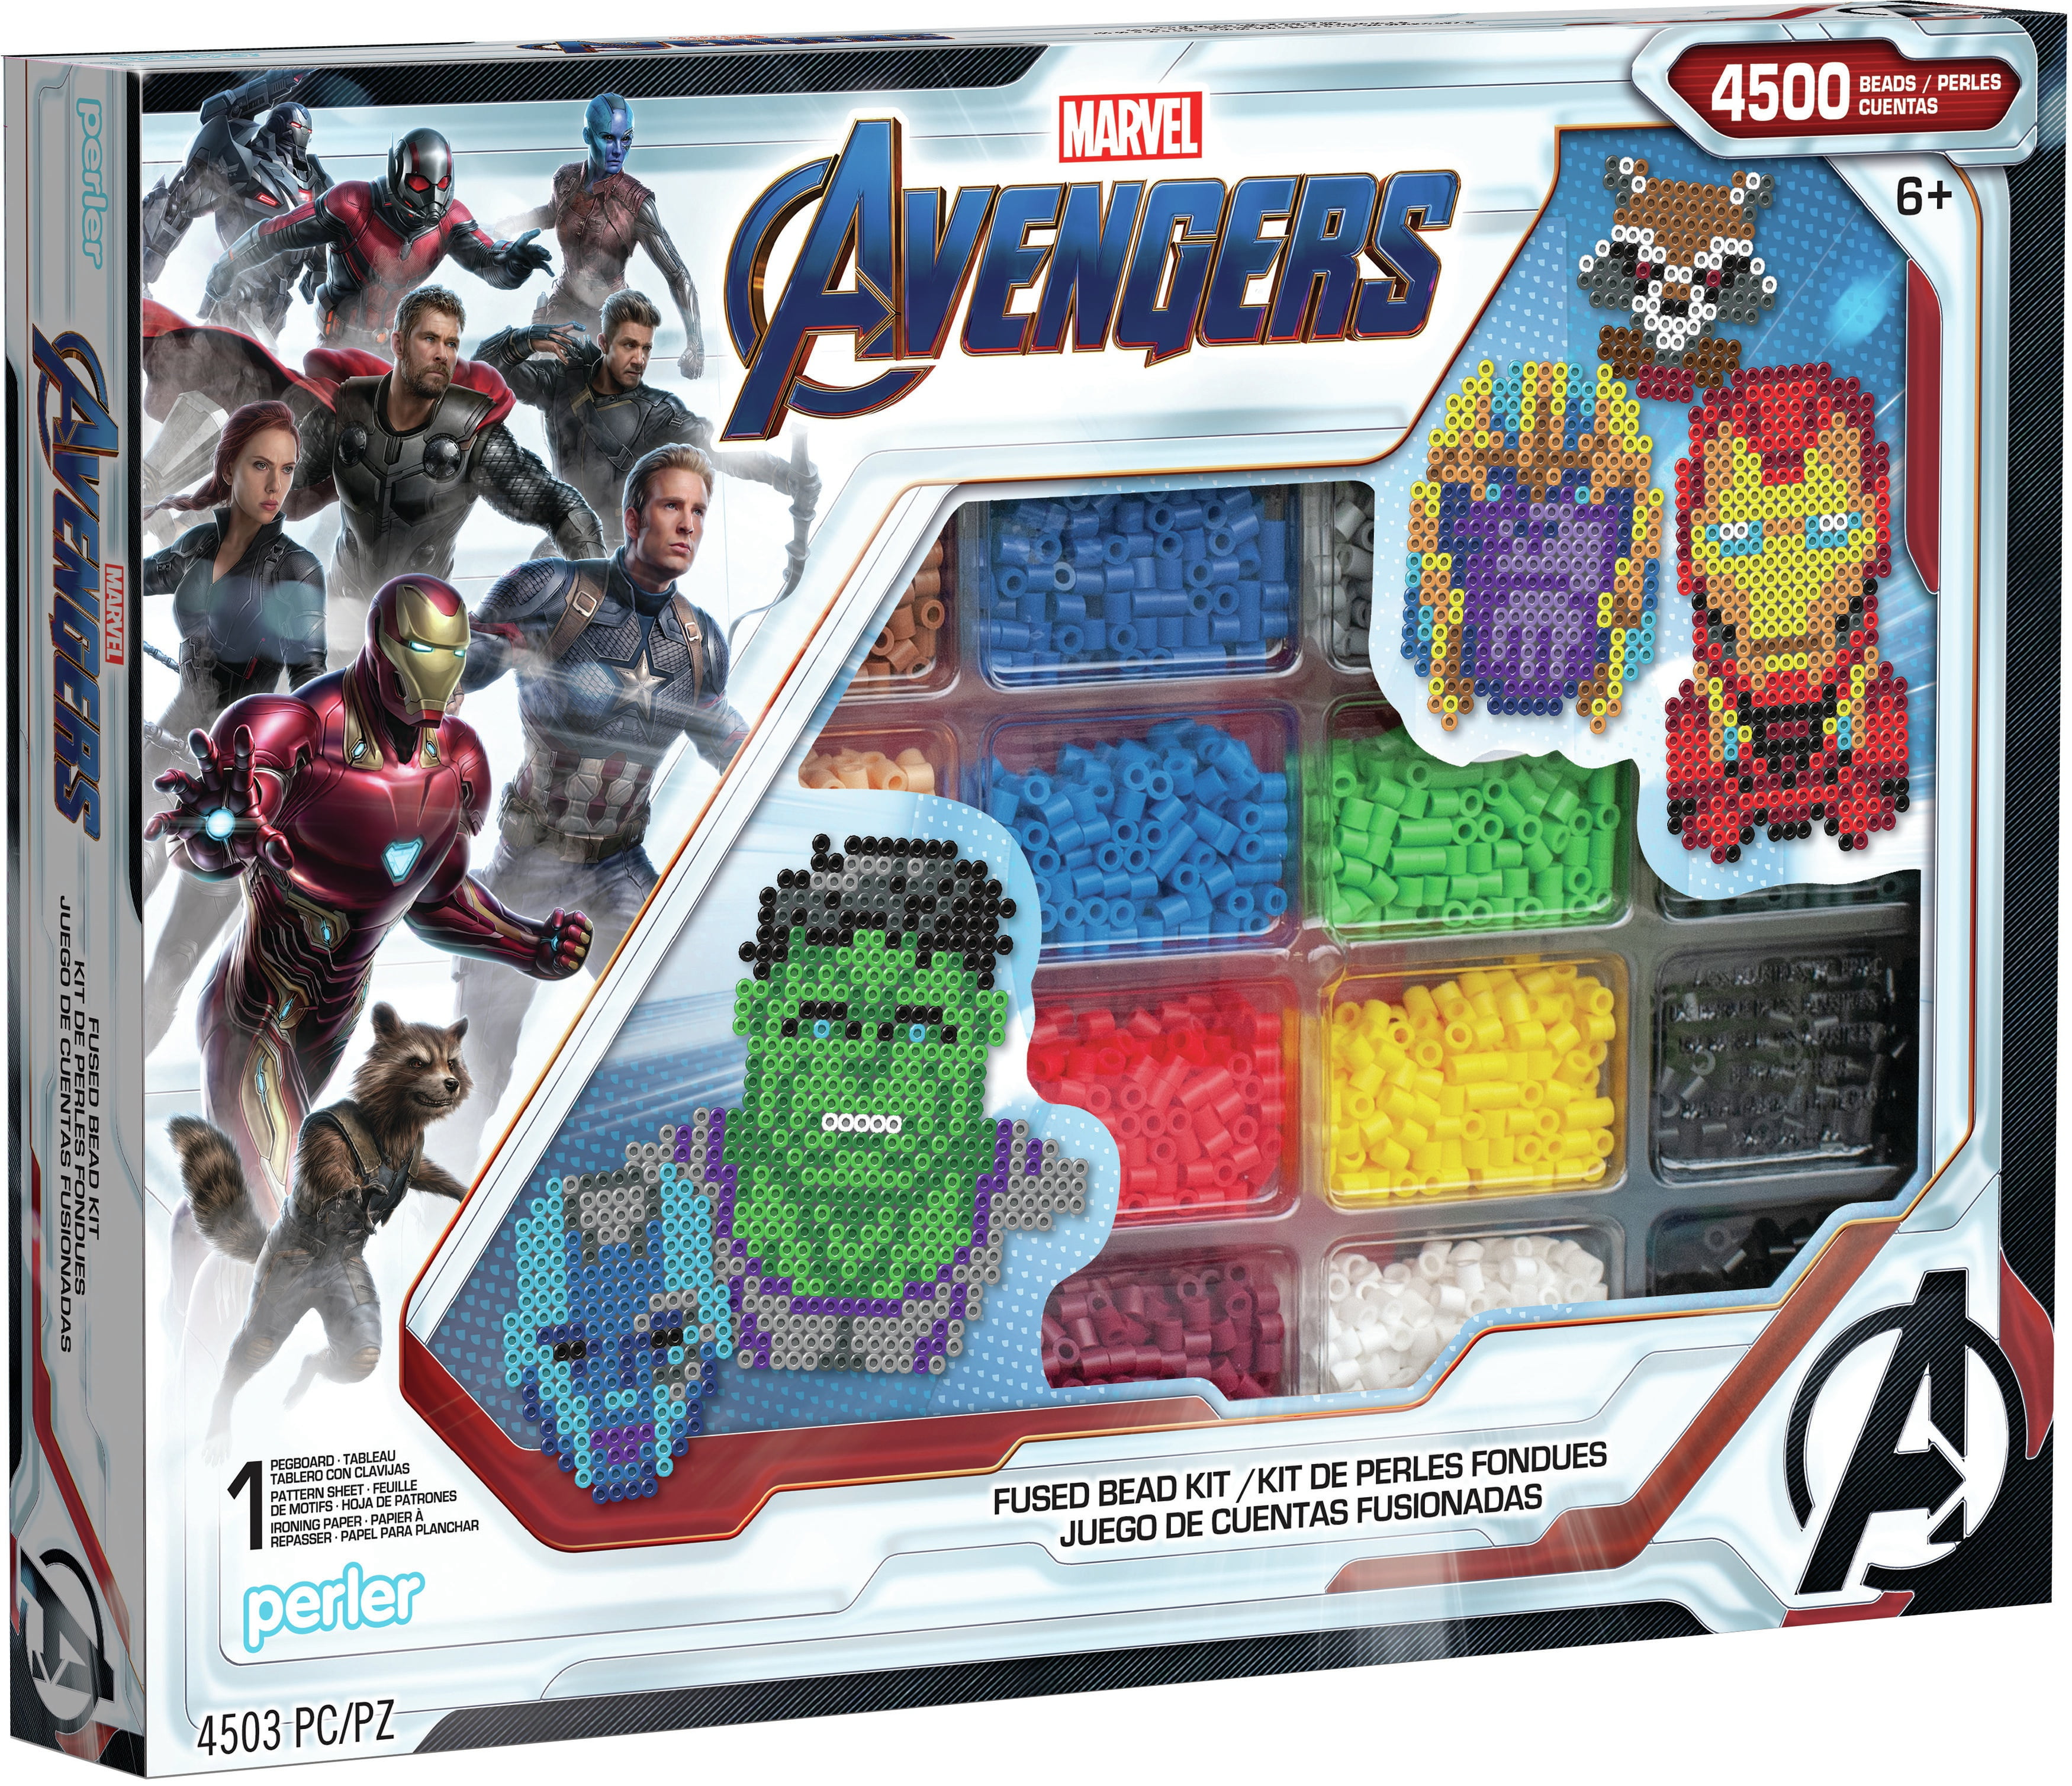 Perler Marvel Avengers Deluxe Fused Bead Craft Kit (4503 Pieces) 